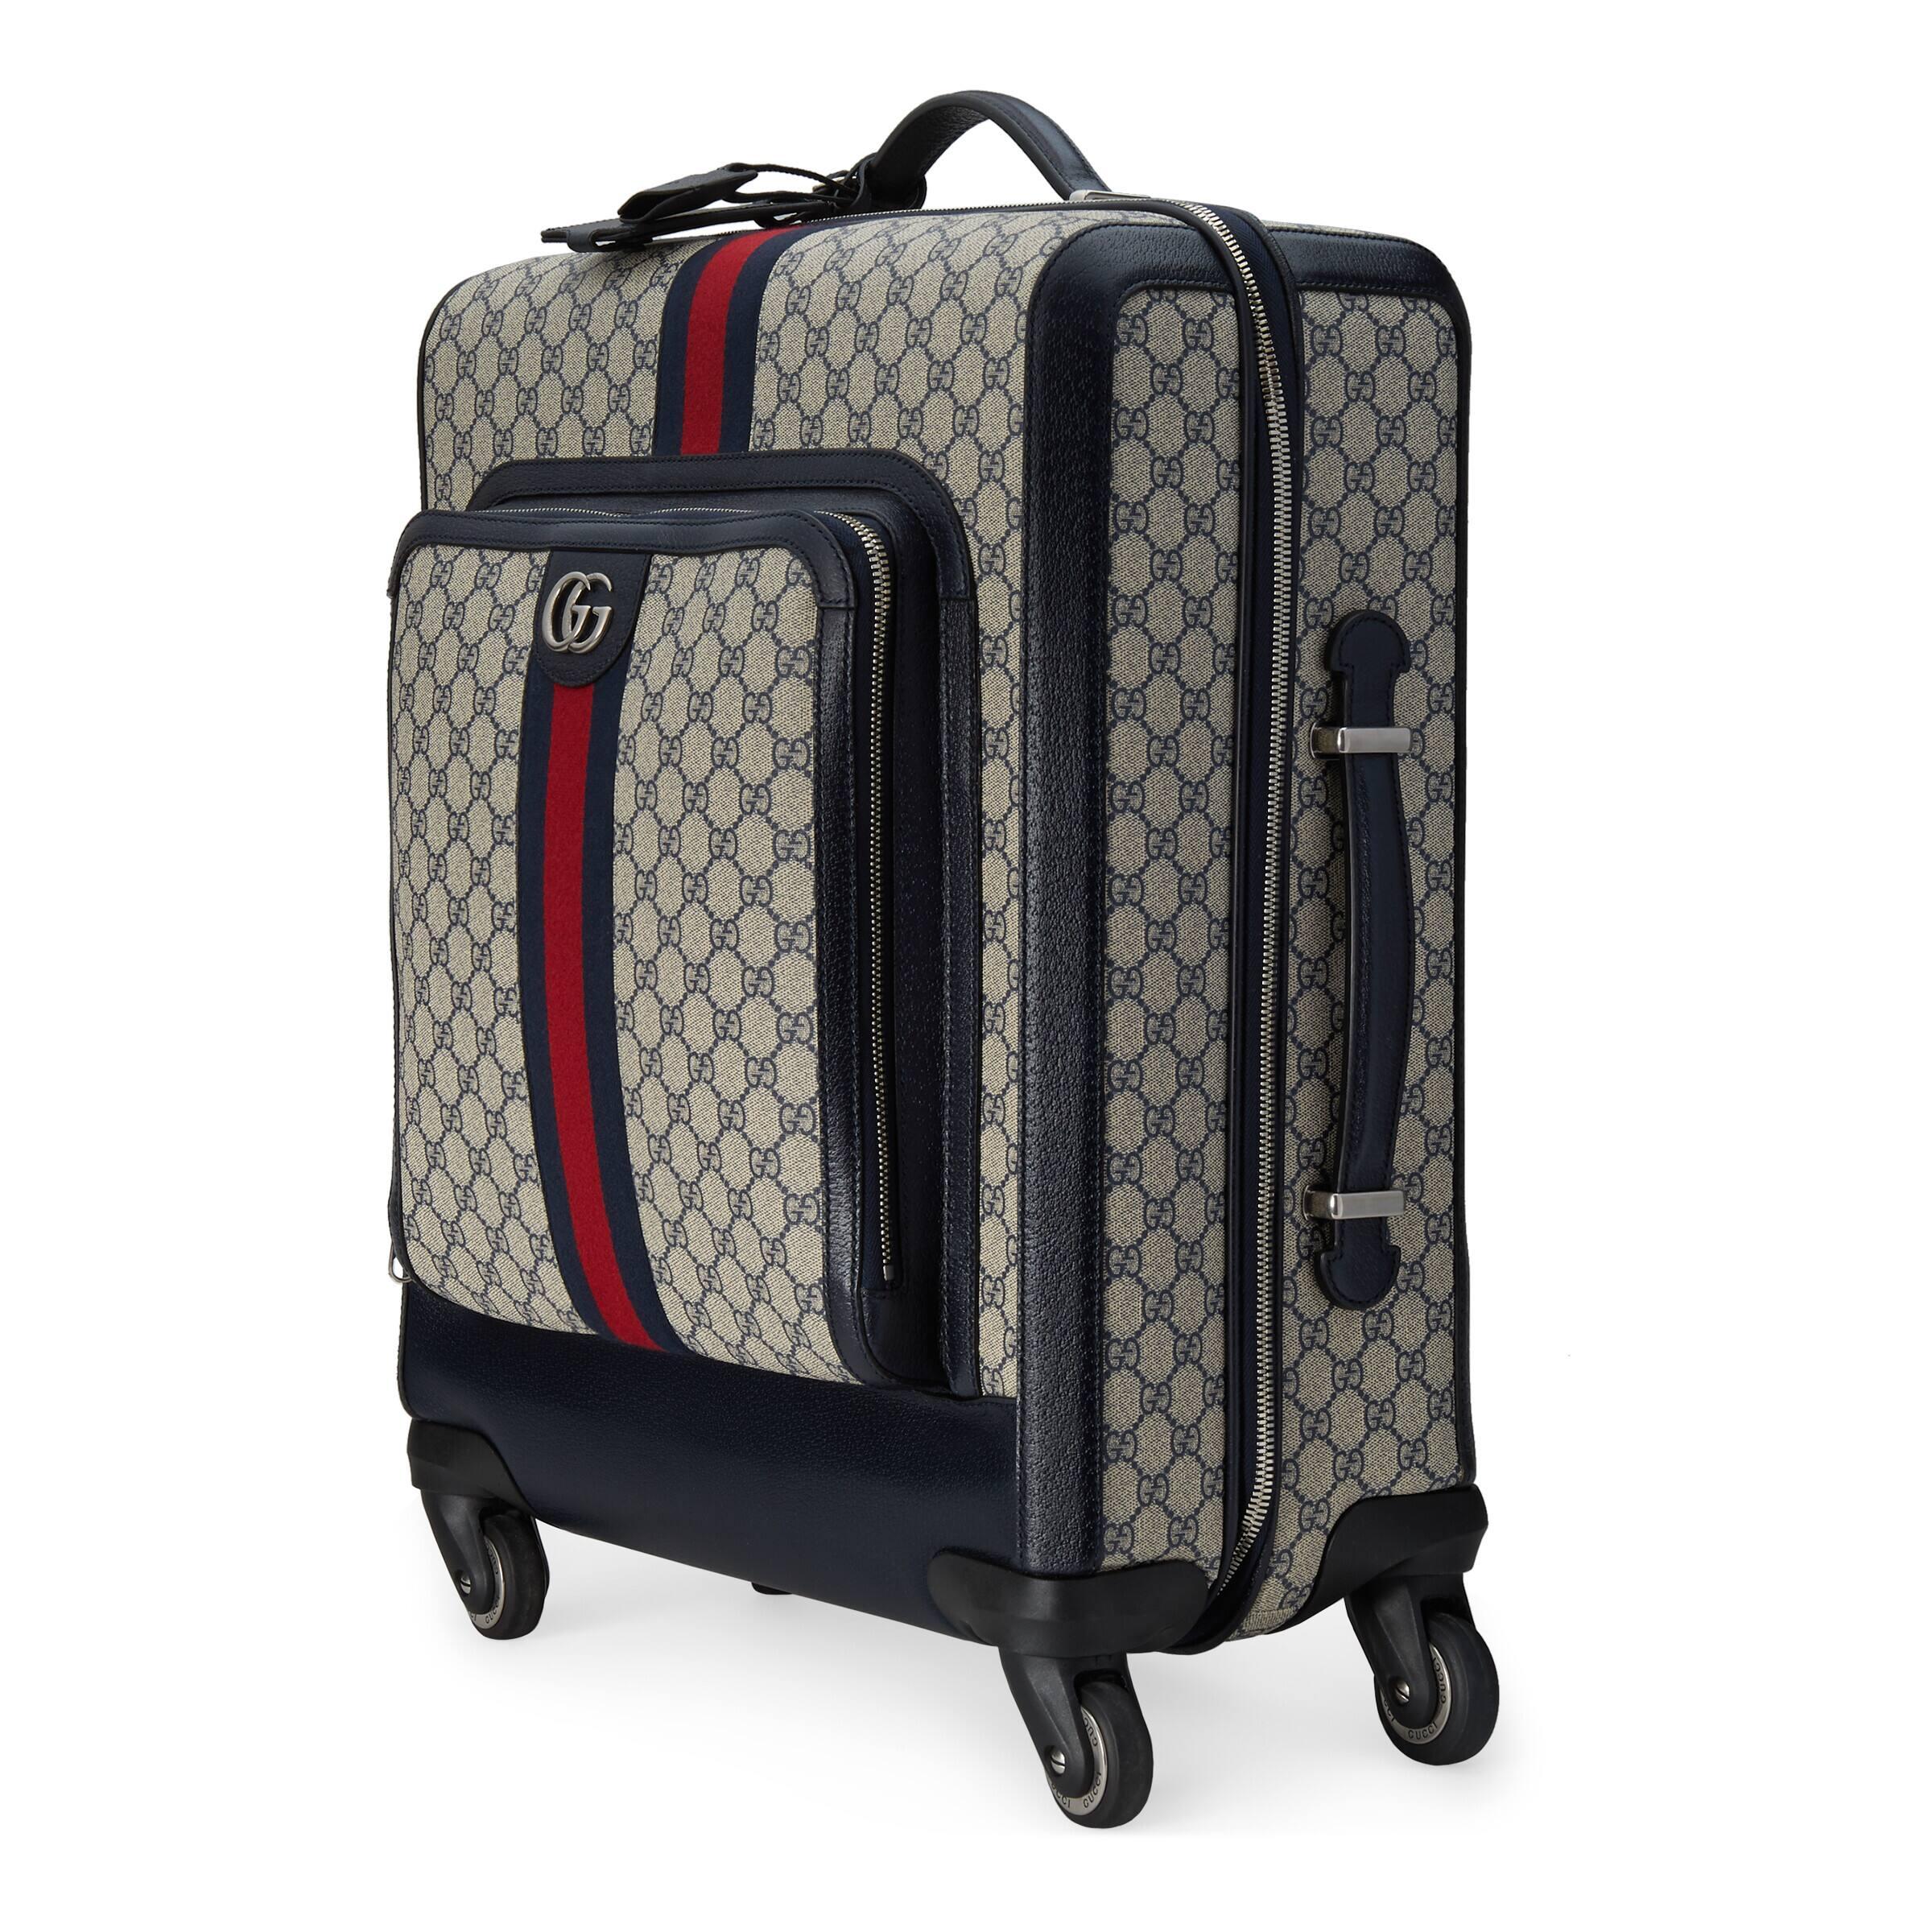 Ophidia GG small cabin trolley in blue and black Supreme